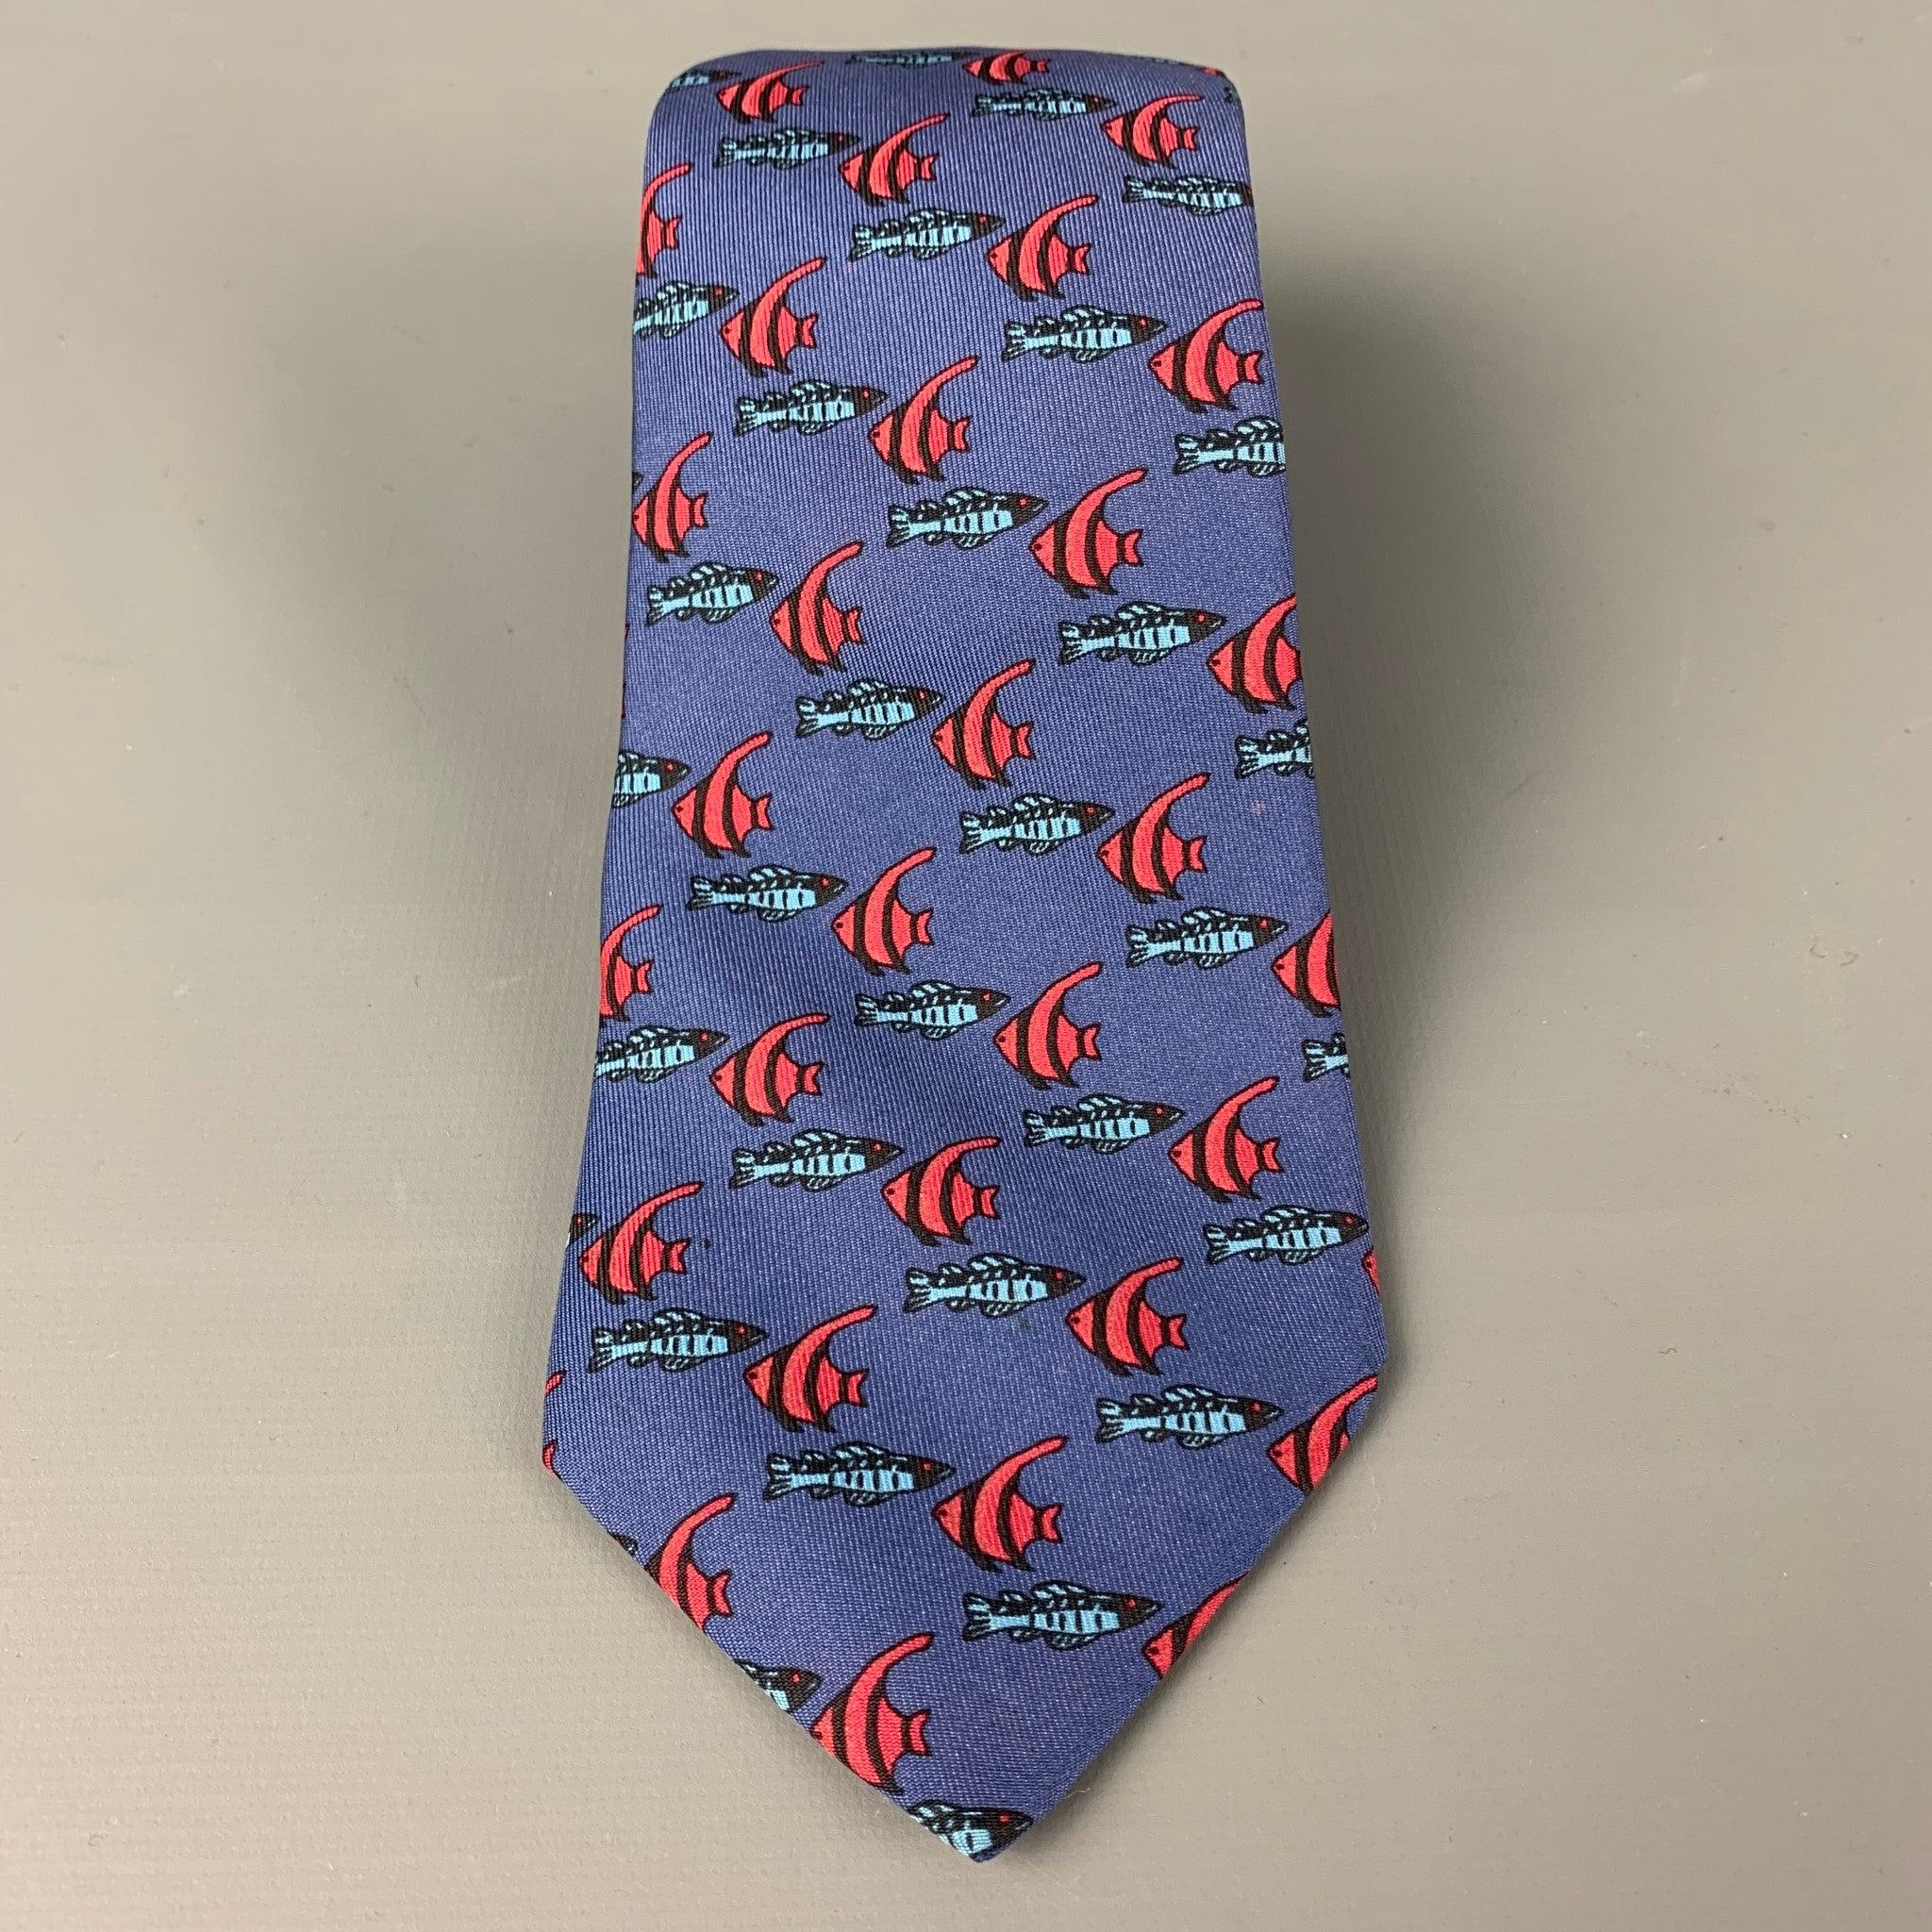 HERMES
 necktie comes in a blue & red silk with a all over fish print. Made in France. Very Good Pre-Owned Condition. 
 

 Marked:  7336 EAWidth: 3.25 inches 
  
  
  
 Sui Generis Reference: 118094
 Category: Tie
 More Details
  
 Brand: HERMES
